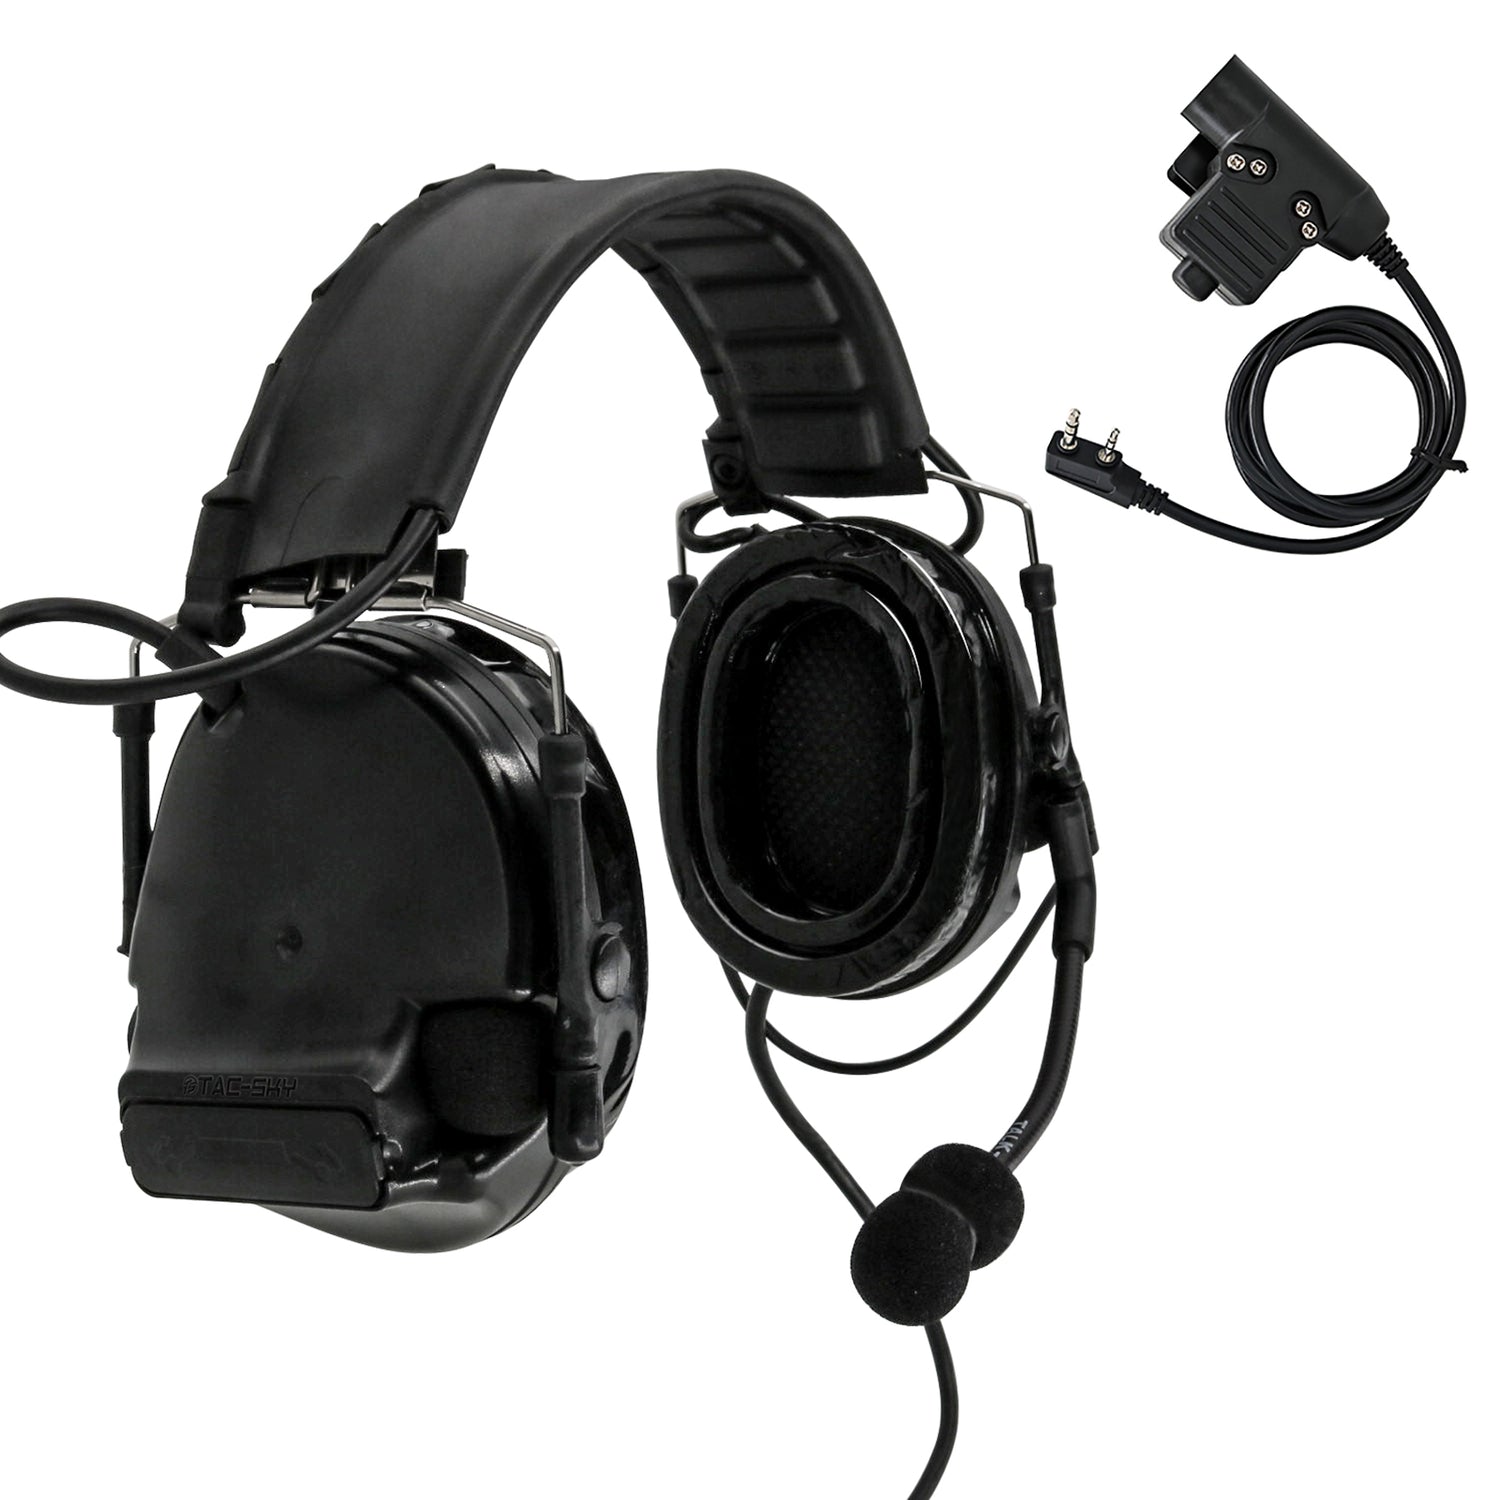 TAC-SKY Focused on creating quality tactical headsets – TS TAC-SKY